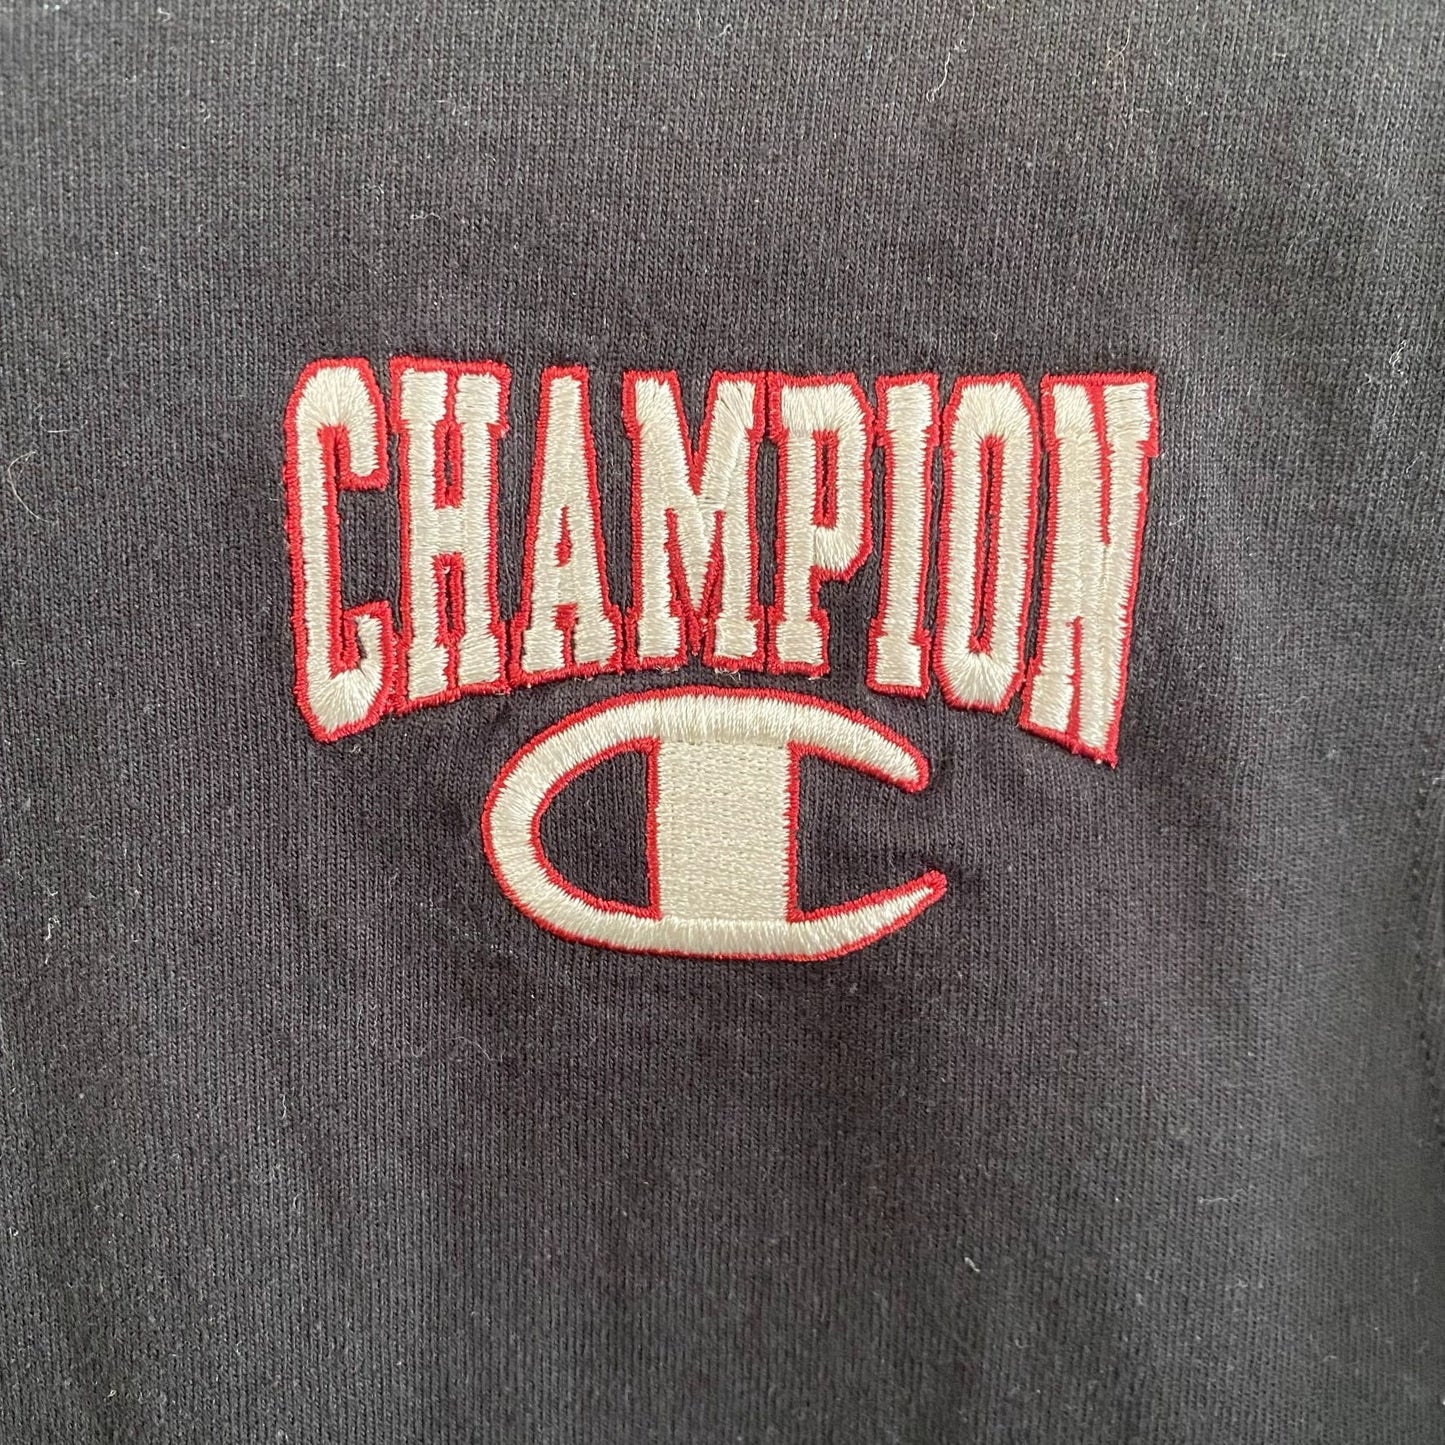 Vintage Embroidered Champion S/S Tee